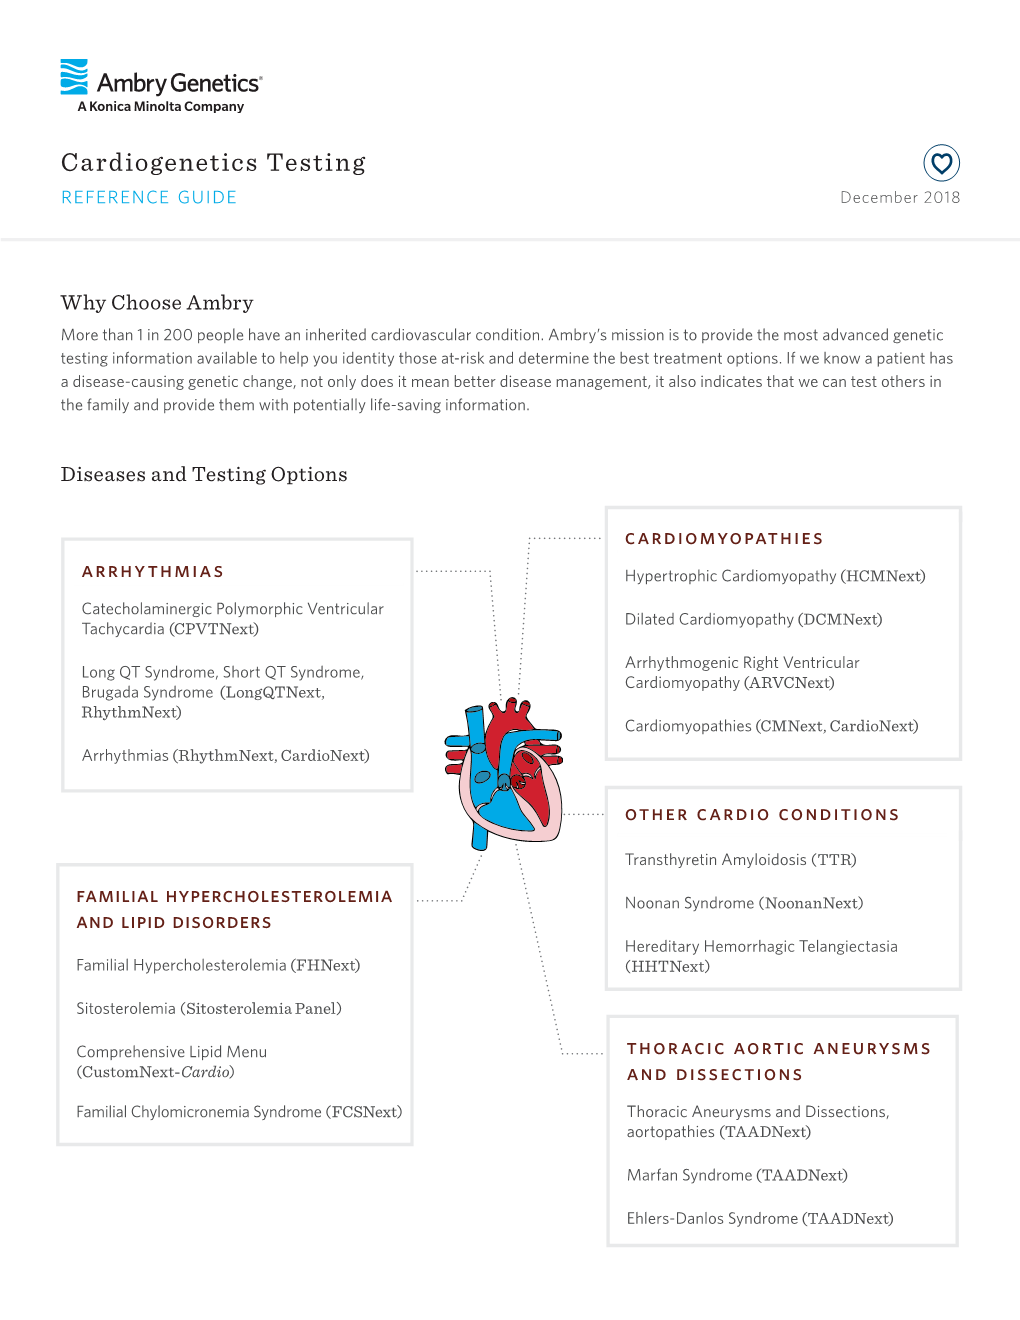 Cardiogenetics Testing Reference Guide December 2018